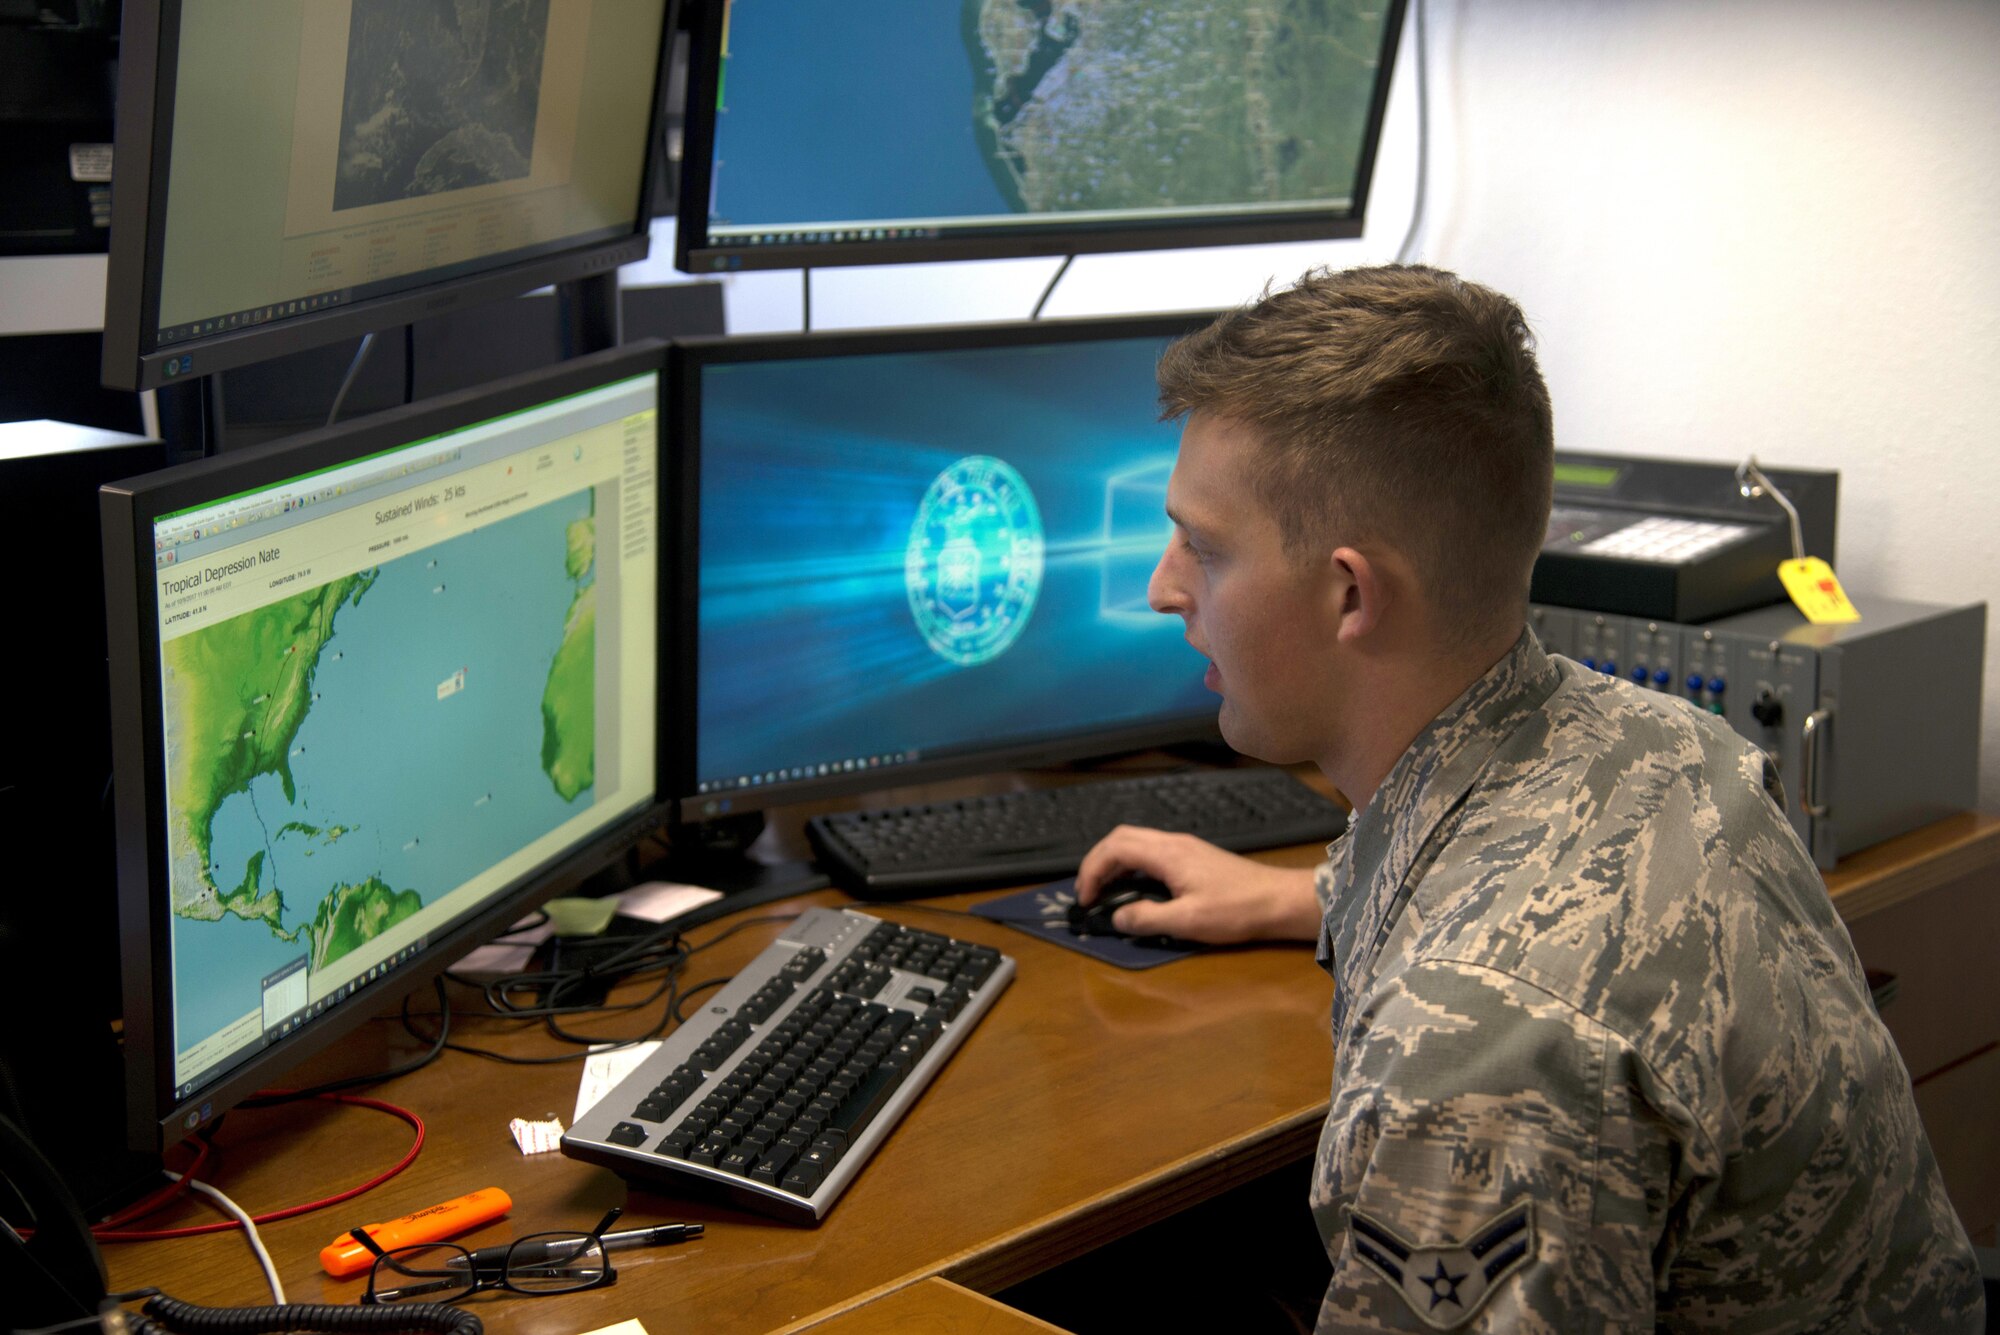 U.S. Air Force Airman 1st Class Ethan Sheptow, a weather forecaster assigned to the 6th Operations Support Squadron, demonstrates how the Hurrtrak program works at MacDill Air Force Base, Fla., Oct. 10, 2017.